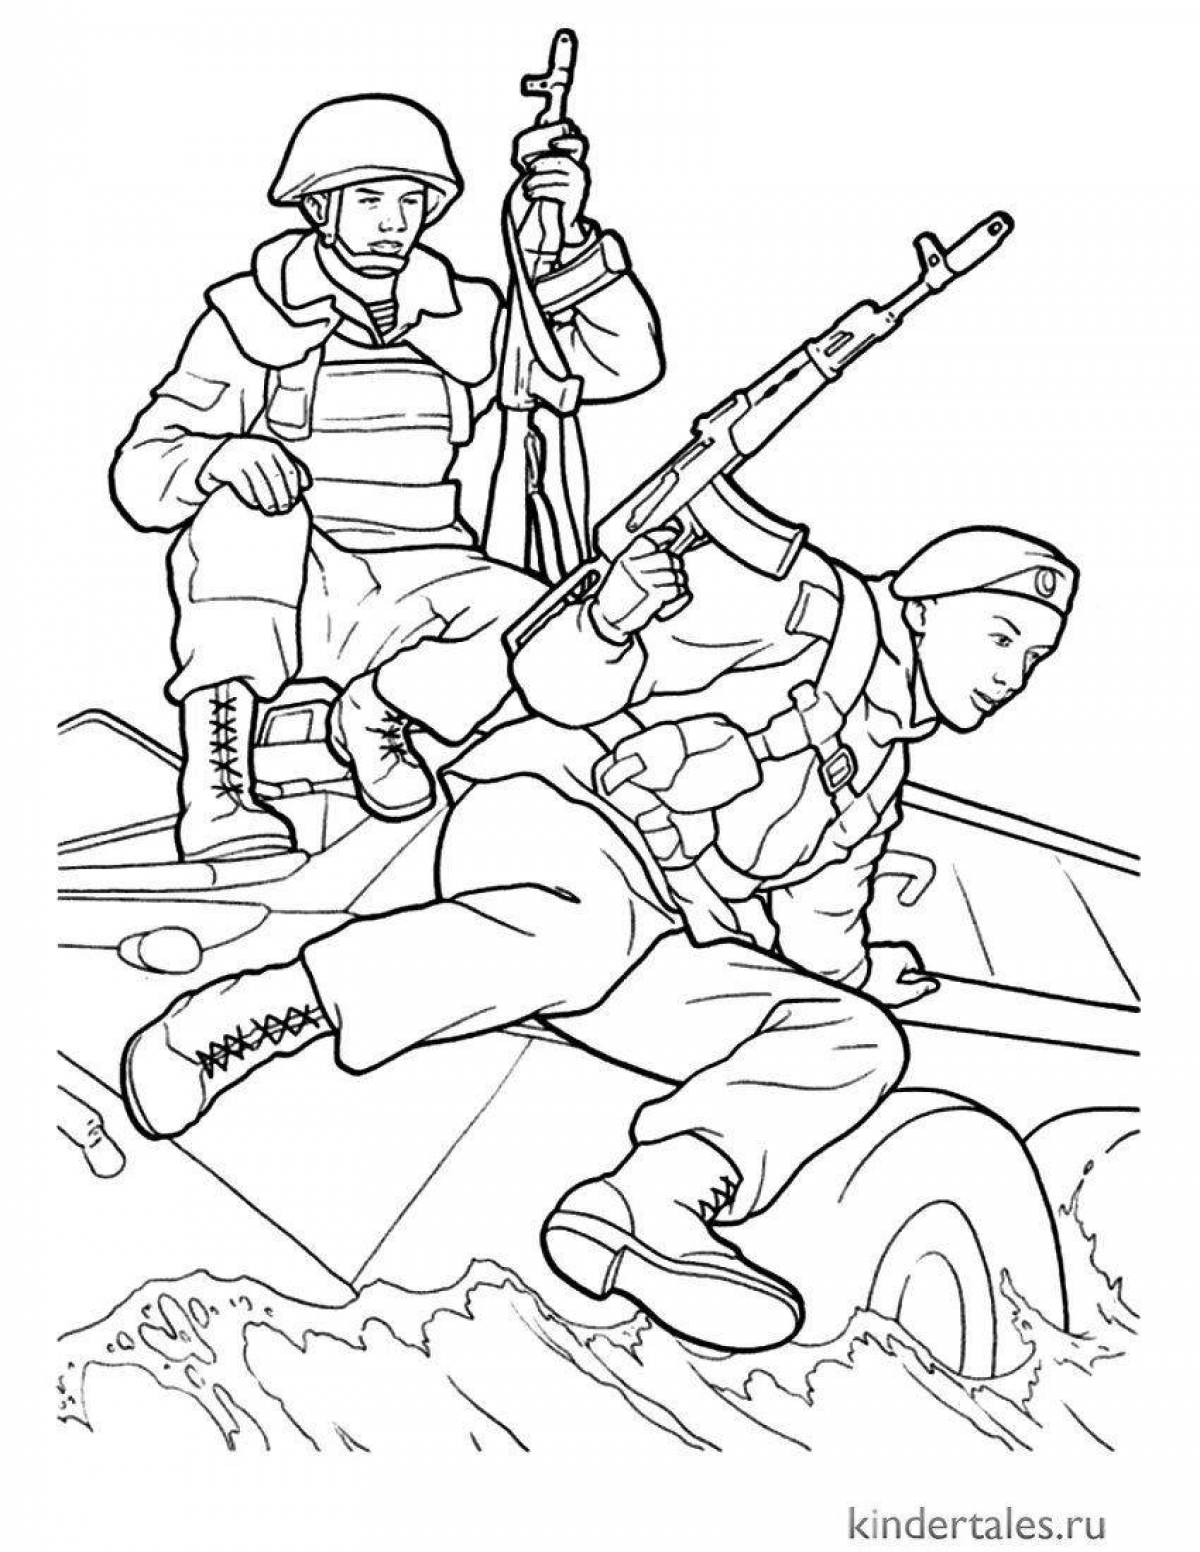 Great military parade coloring page